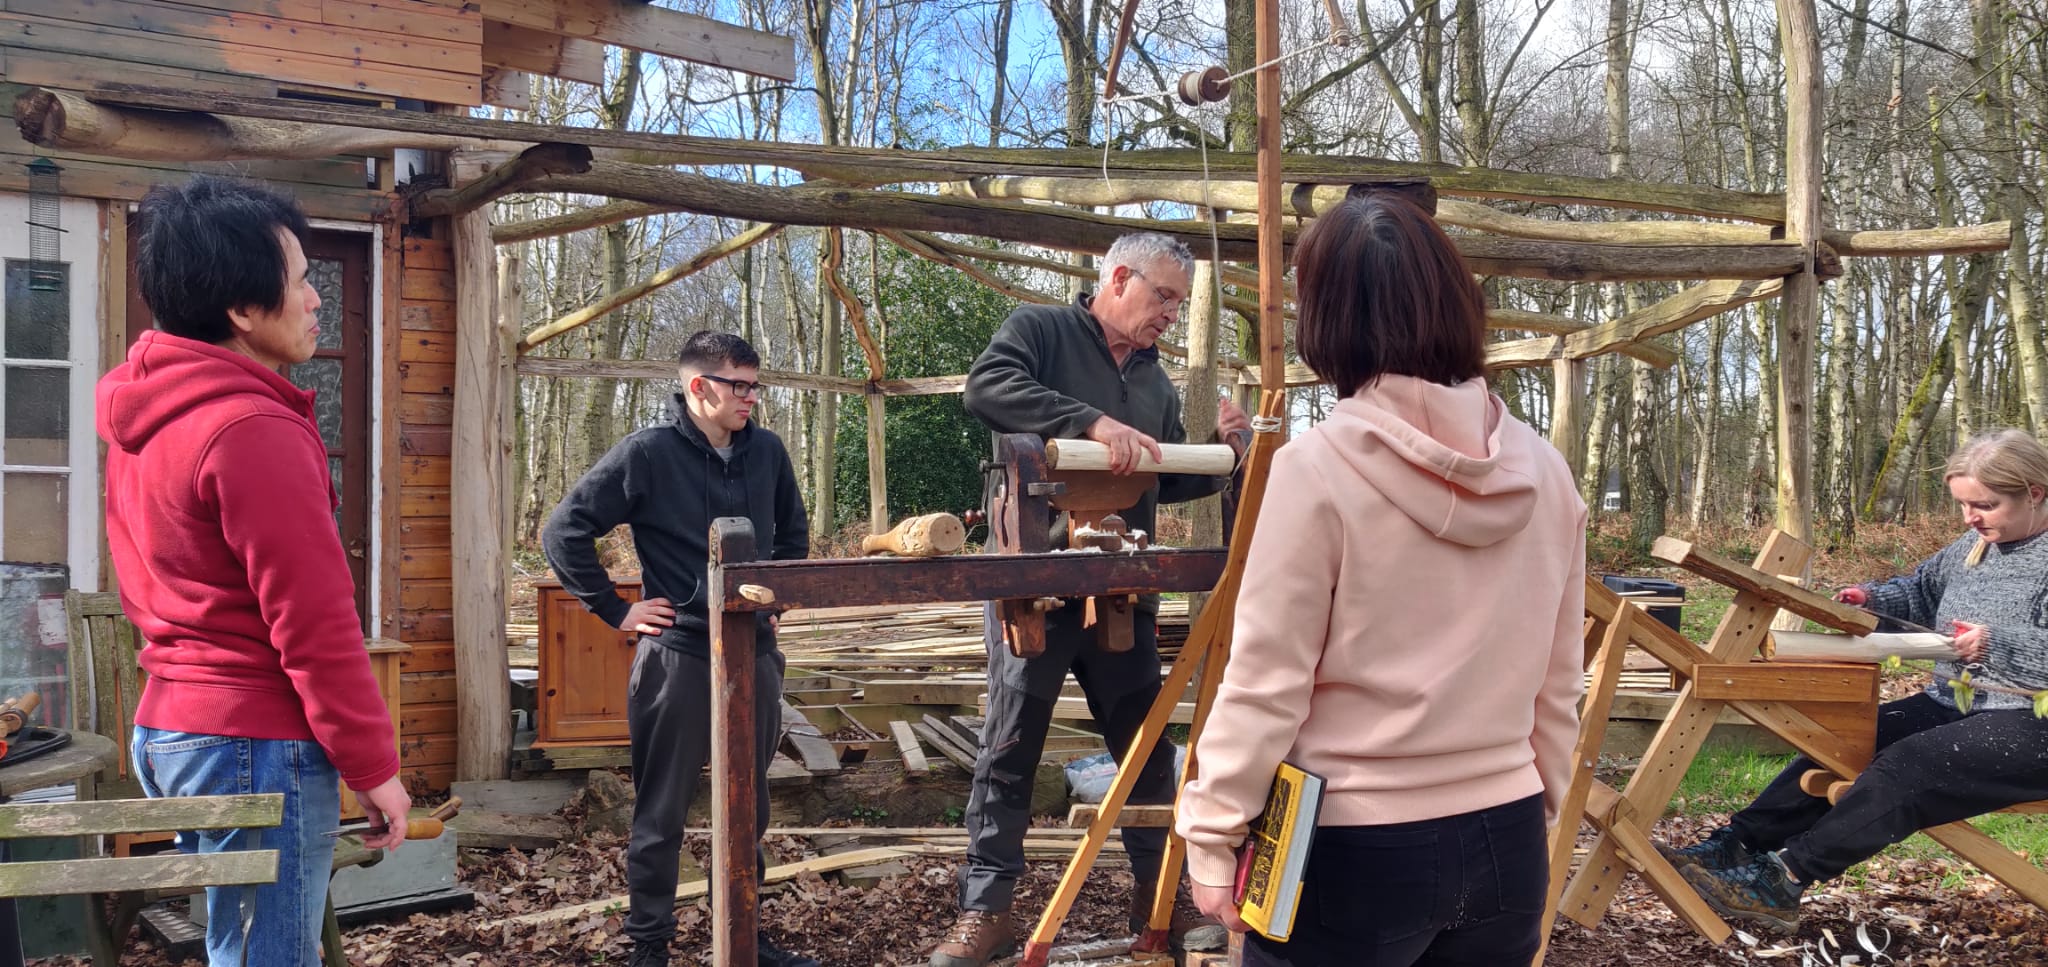 Image shows participants taking part in the wood work class